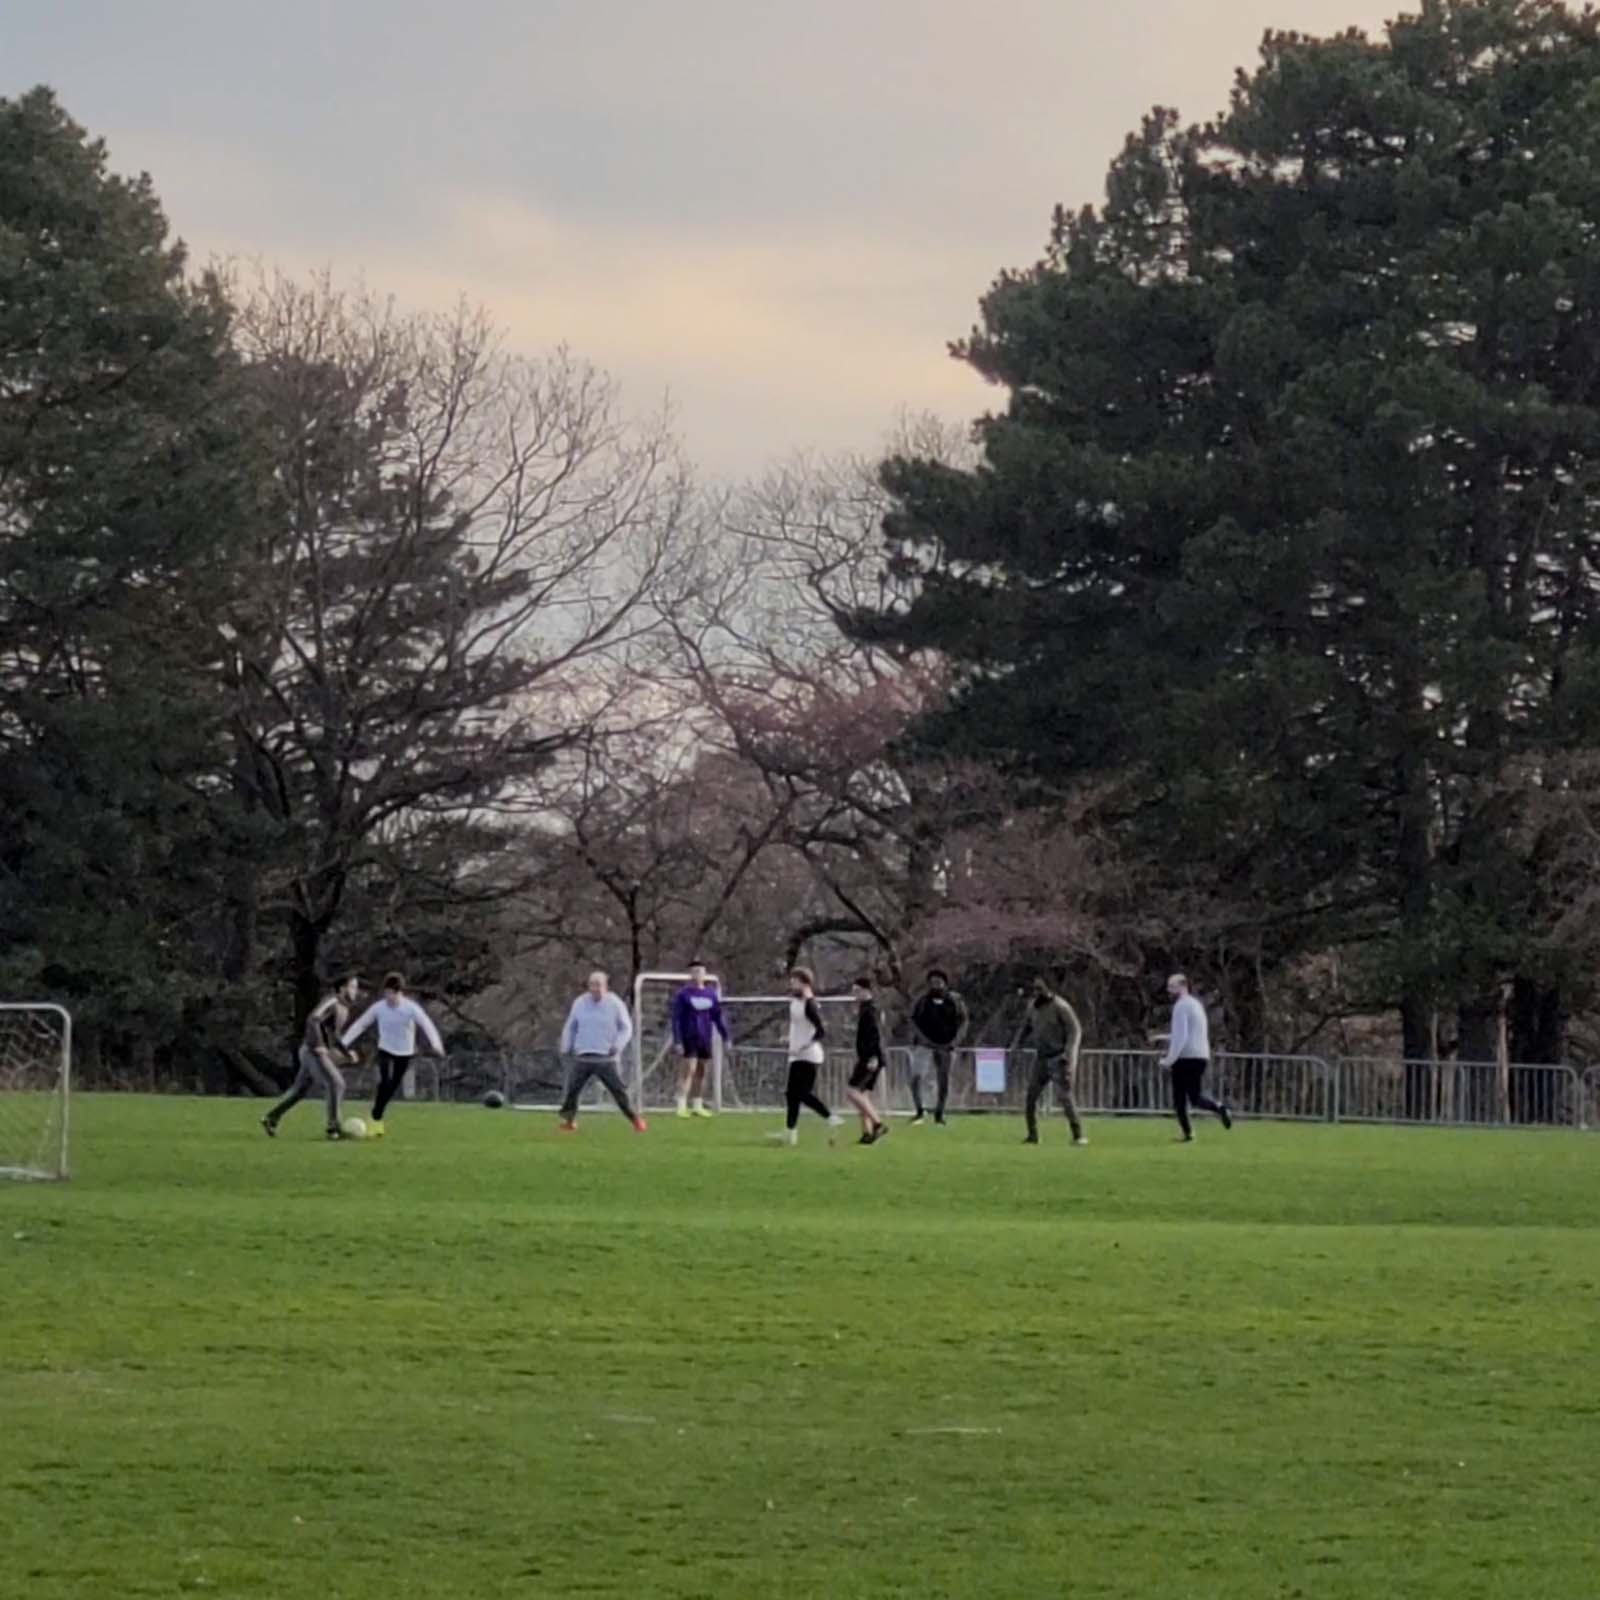 Cherry blossoms 2021 Covid-19 - Soccer game at High Park